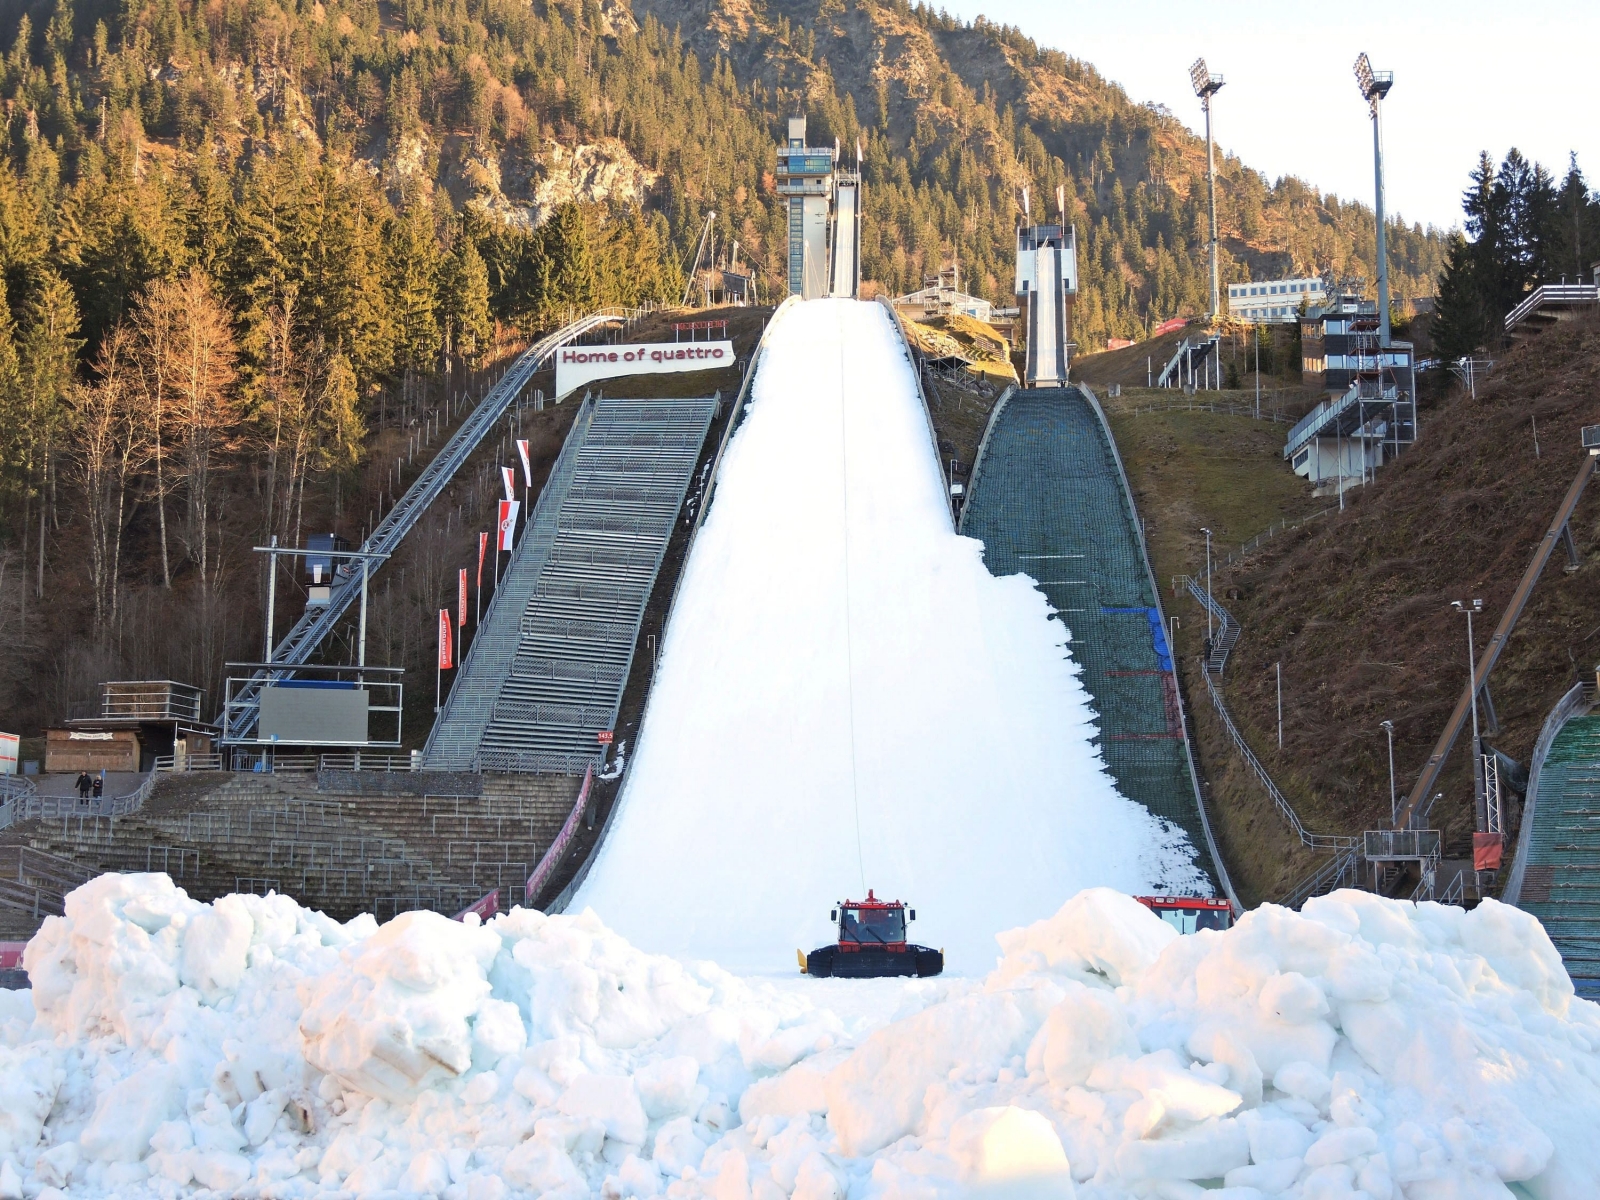 epa05079569 HANDOUT - A†handout by the OK Vierschanzentournee (organising committee of the Four-Hill tournament) shows the snow-covered ski-jumping hill in the Erdinger-Arena, surrounded by the snowless landscape in Oberstdorf, Germany, 22 December 2015. The 64th Four Hills Tournament is due to begin in Oberstdorf on December 28th.  EPA/OK Vierschanzentournee HANDOUT (ATTENTION EDITORS: FOR EDITORIAL USE ONLY IN CONNECTION WITH CURRENT REPORTING / MANDATORY CREDIT: "PHOTO: OK Vierschanzentournee/dpa") HANDOUT EDITORIAL USE ONLY/NO SALES GERMANY SKI JUMPING WORLD CIP